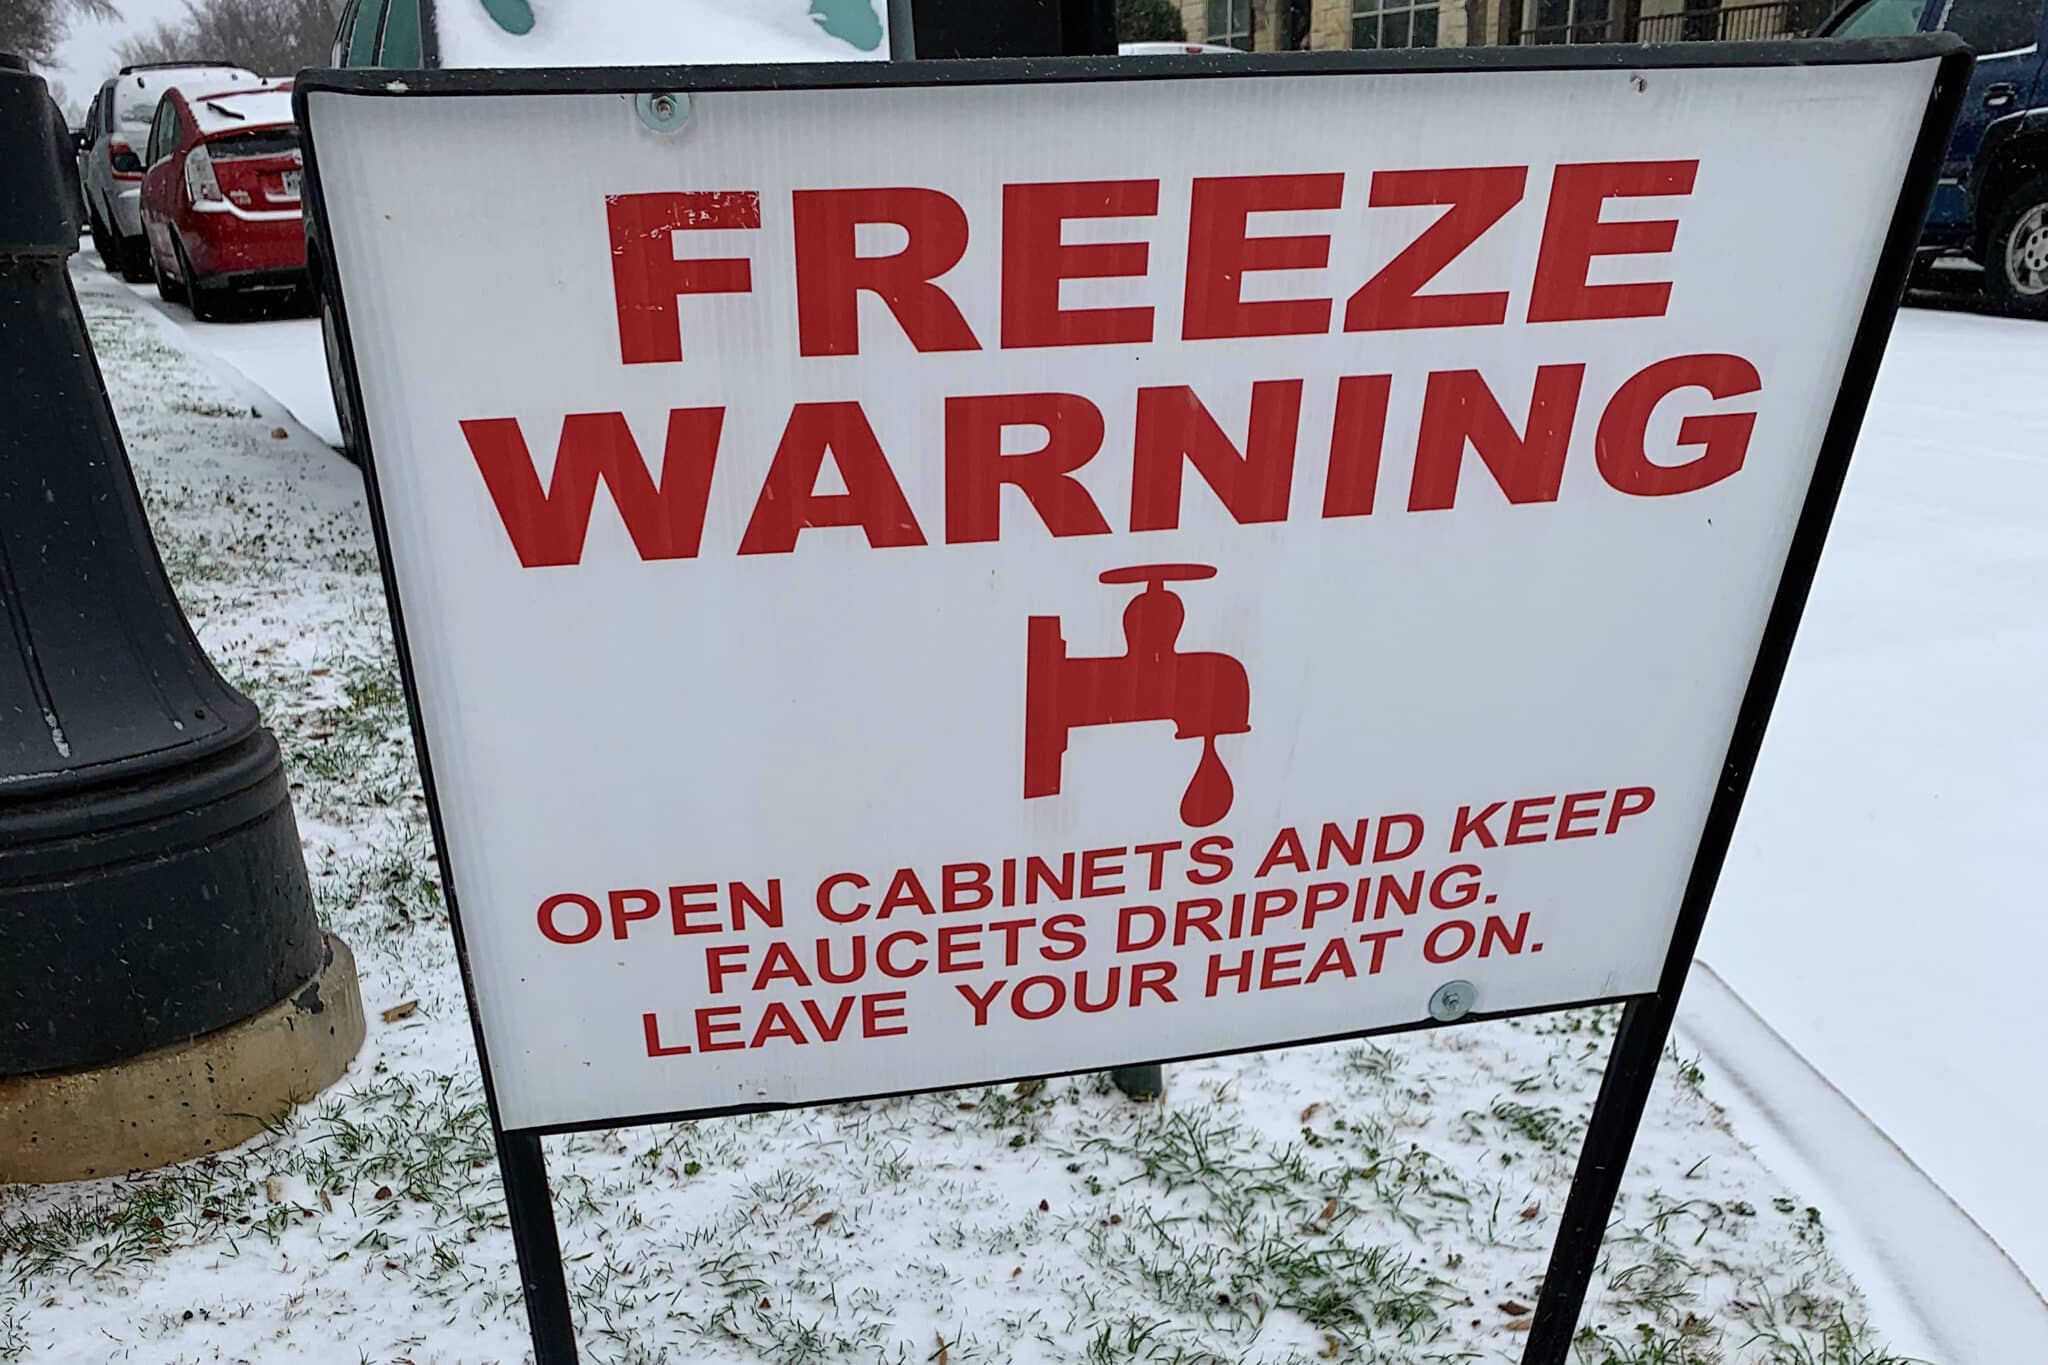 Freeze warning issued for North and Central Georgia